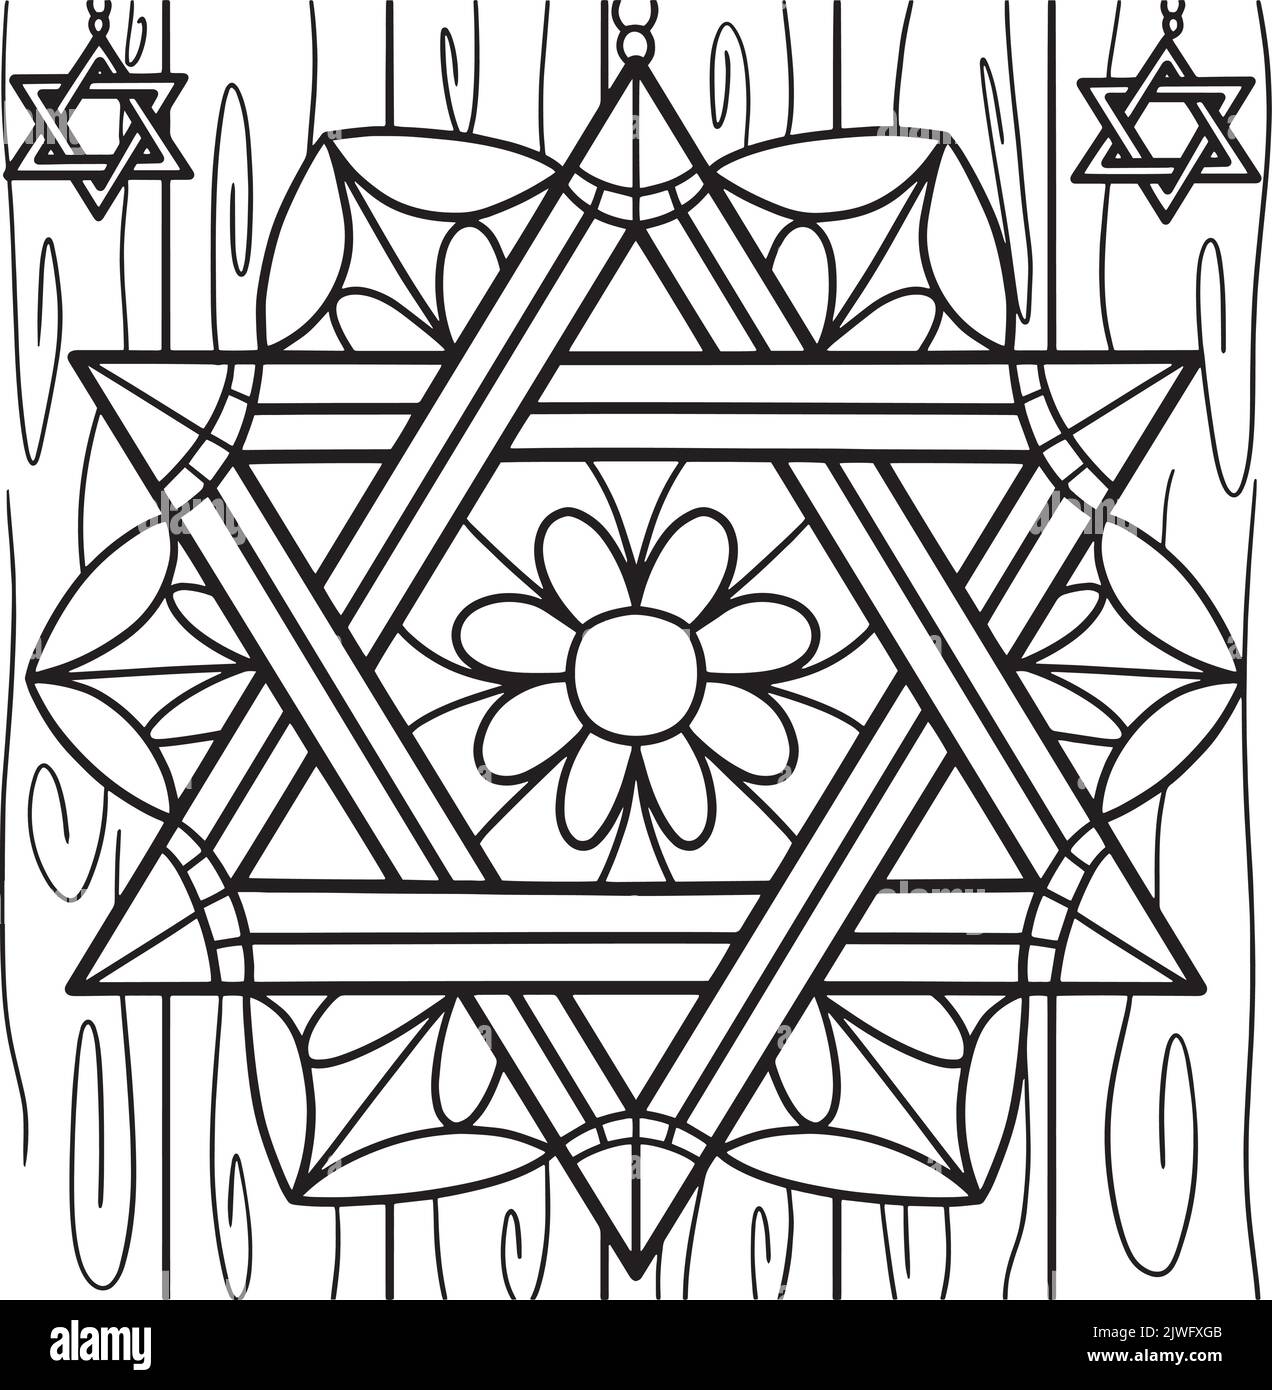 Star of david black and white stock photos images